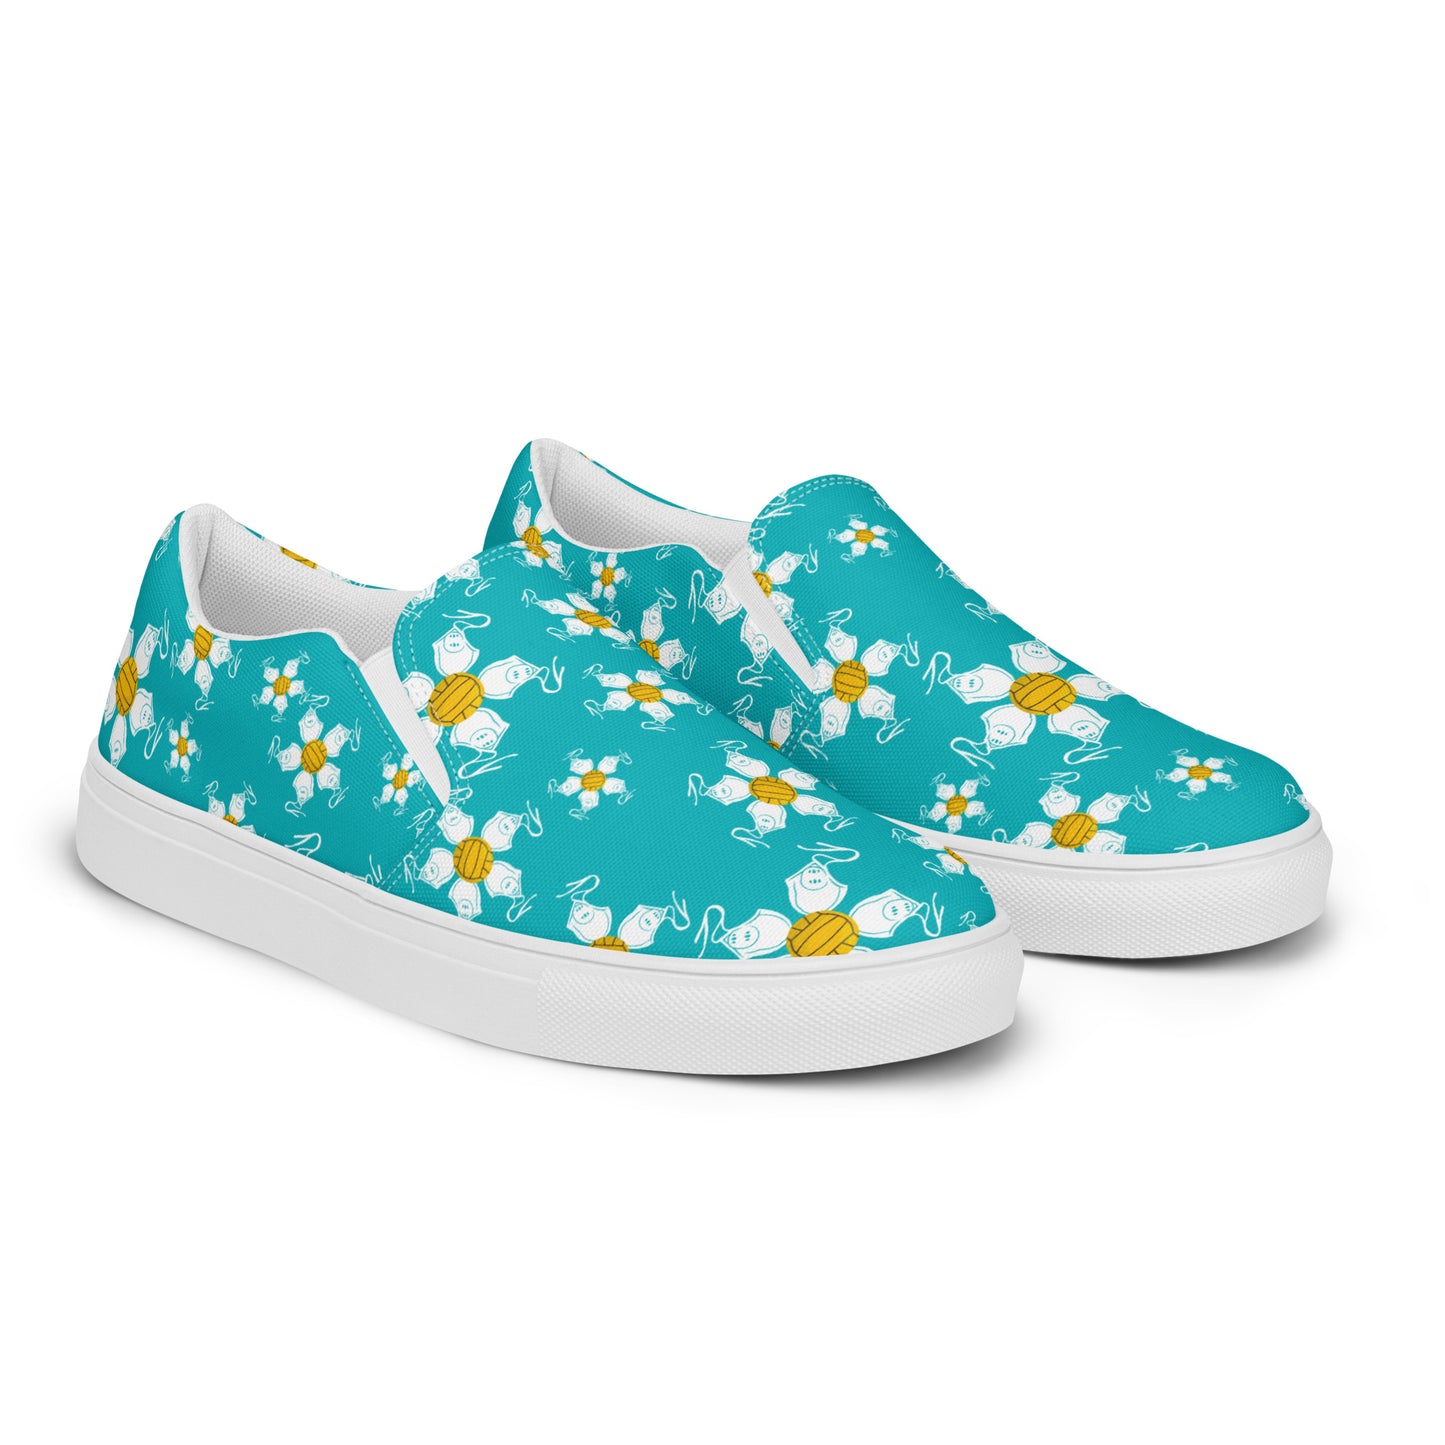 Water Polo Floral Women’s slip-on canvas shoes